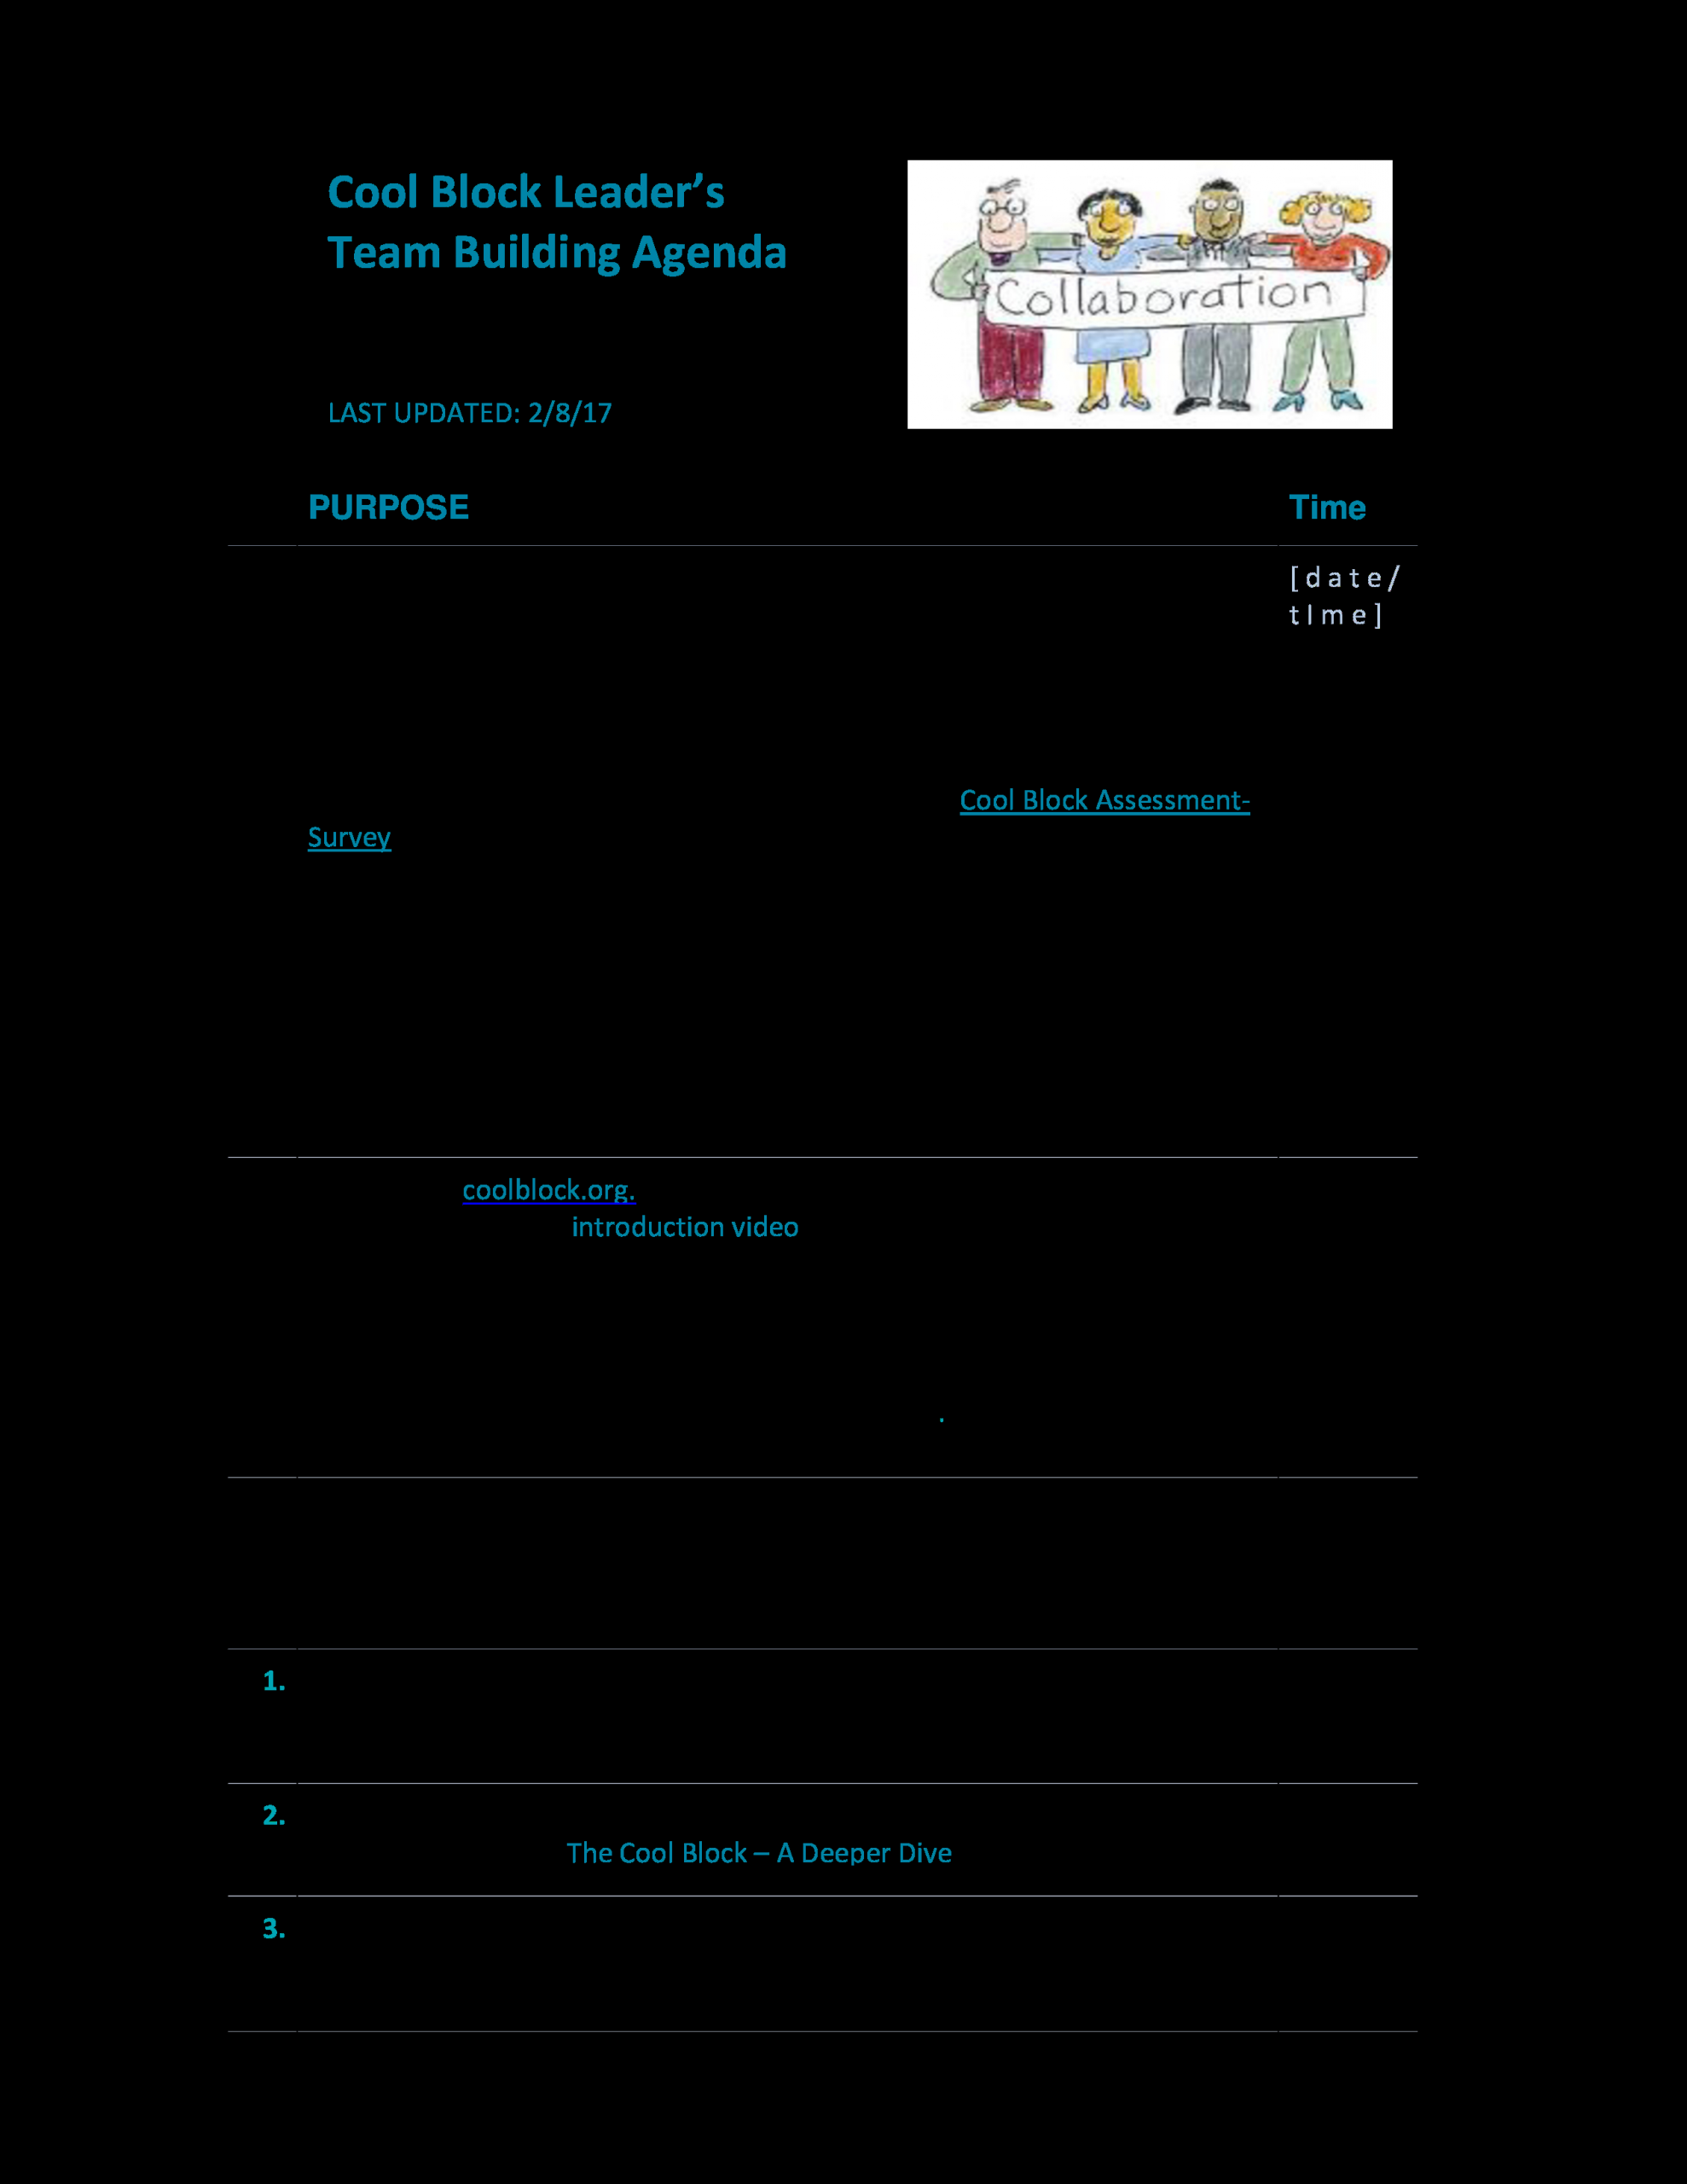 Team Building Agenda Schedule Templates At inside proportions 2550 X 3300